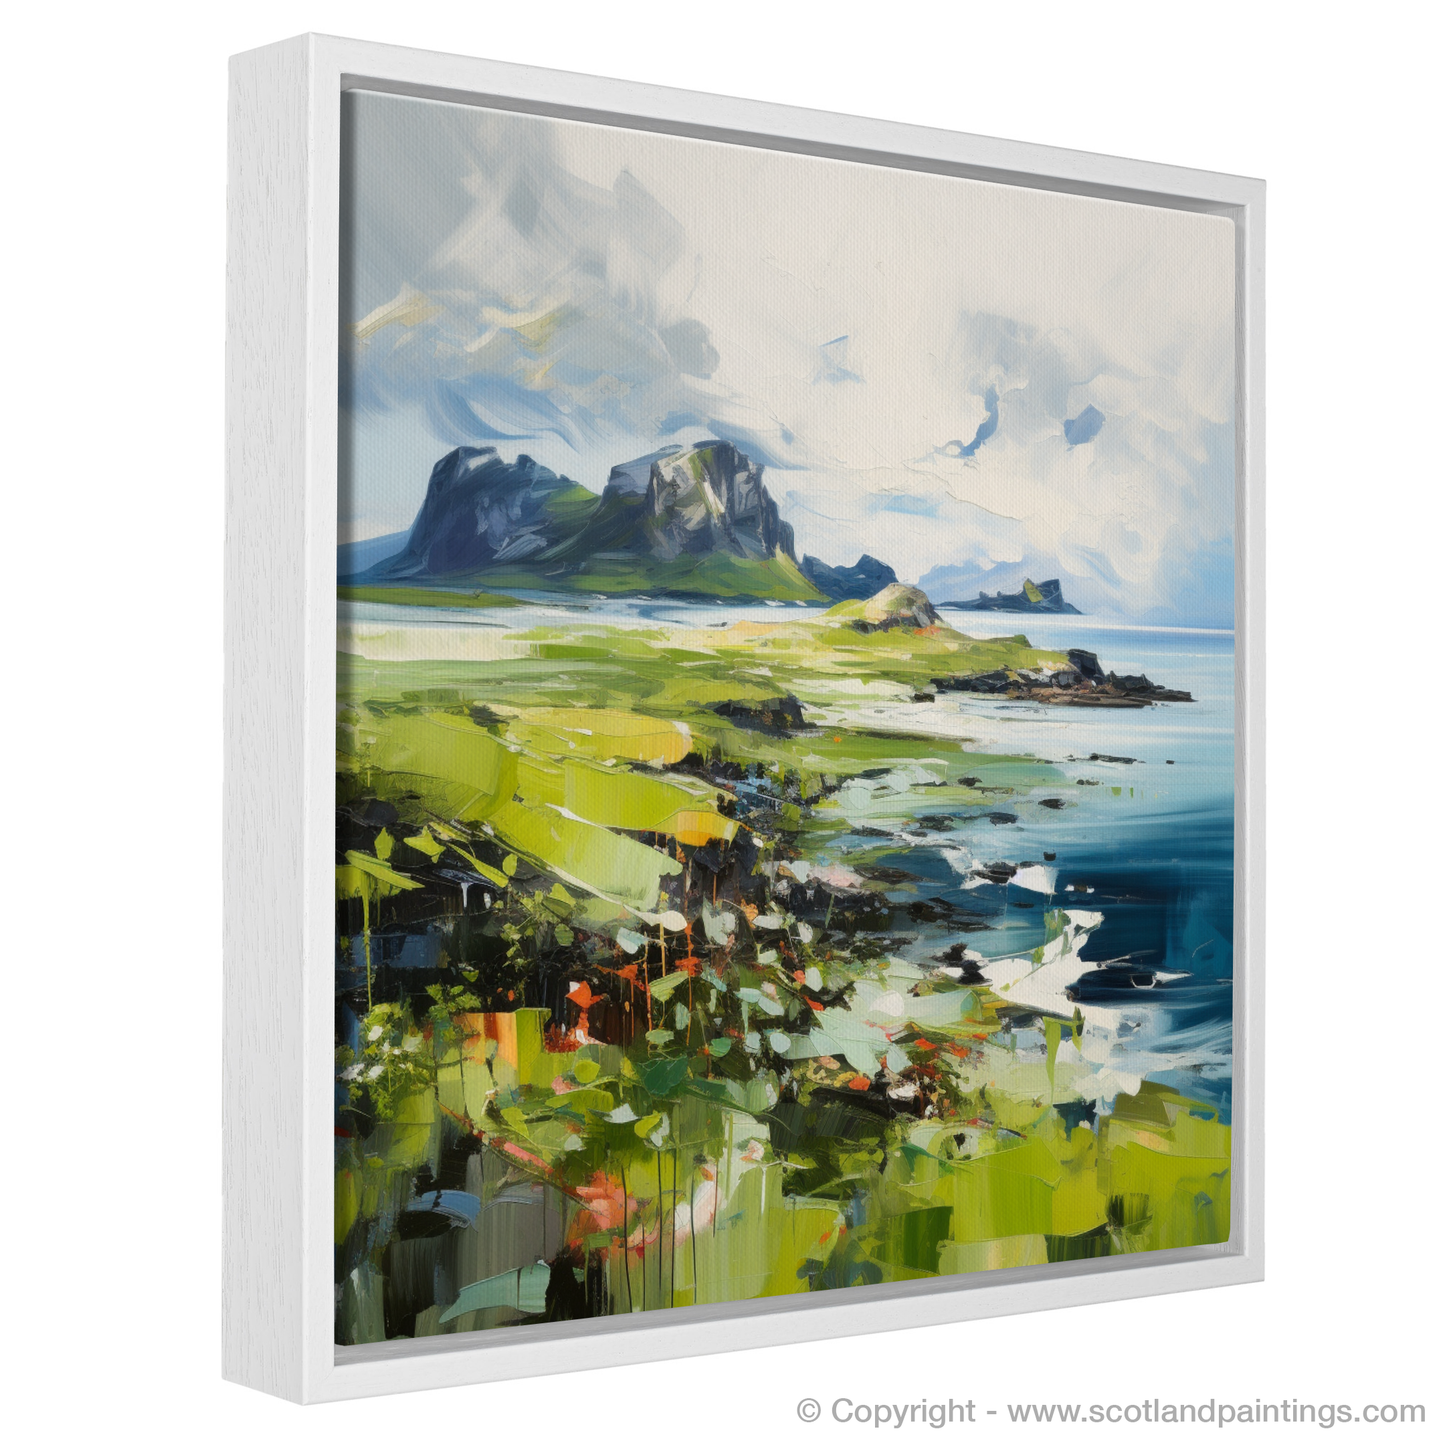 Painting and Art Print of Isle of Eigg, Inner Hebrides entitled "Isle of Eigg Unleashed: An Expressionist Ode to Scotland's Wild Beauty".